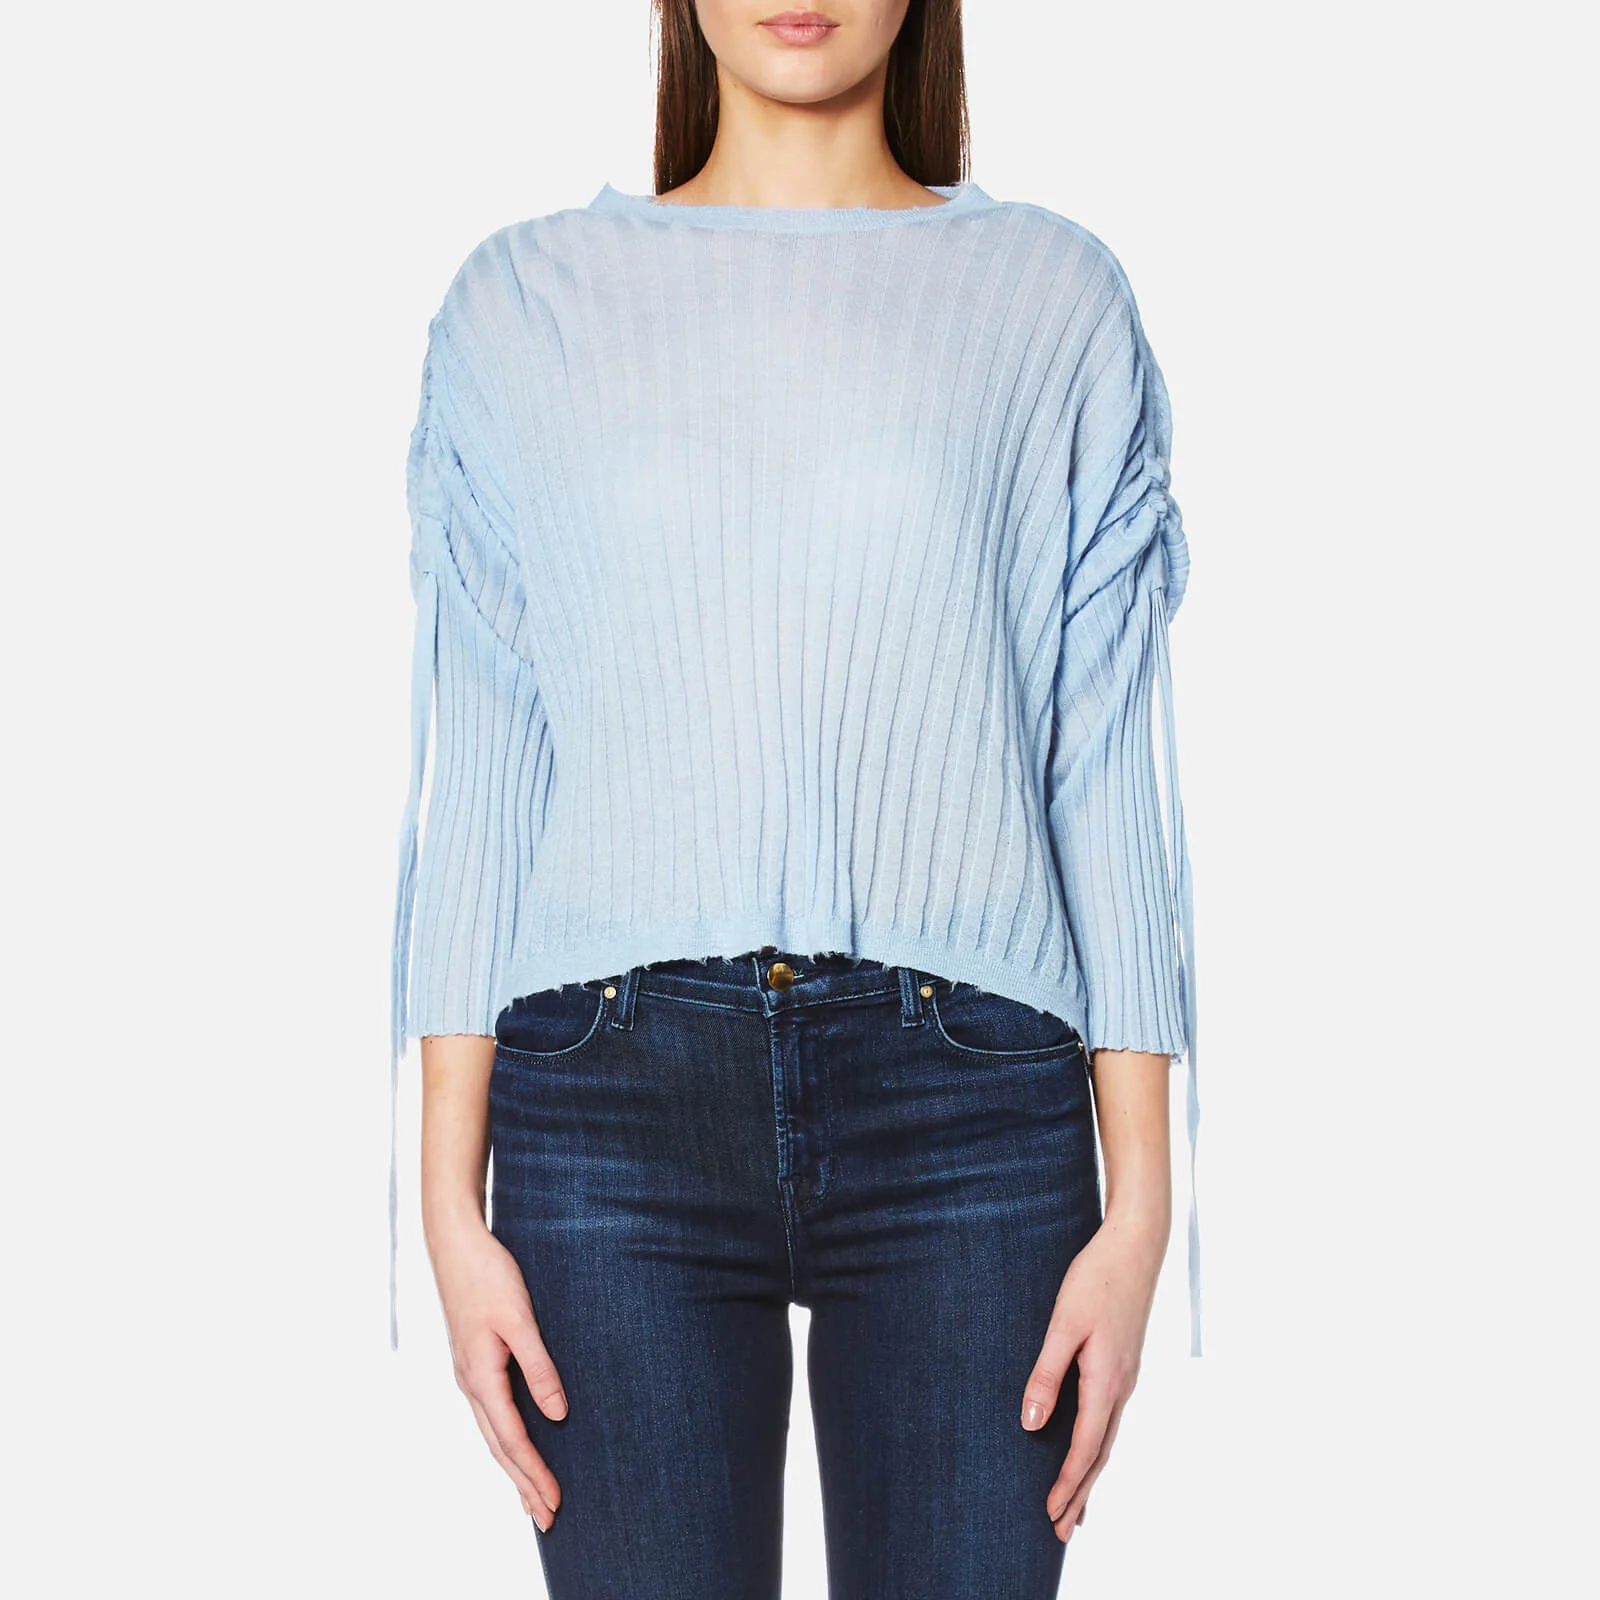 Helmut Lang Women's Gathered Sleeve Top - Wave Image 1